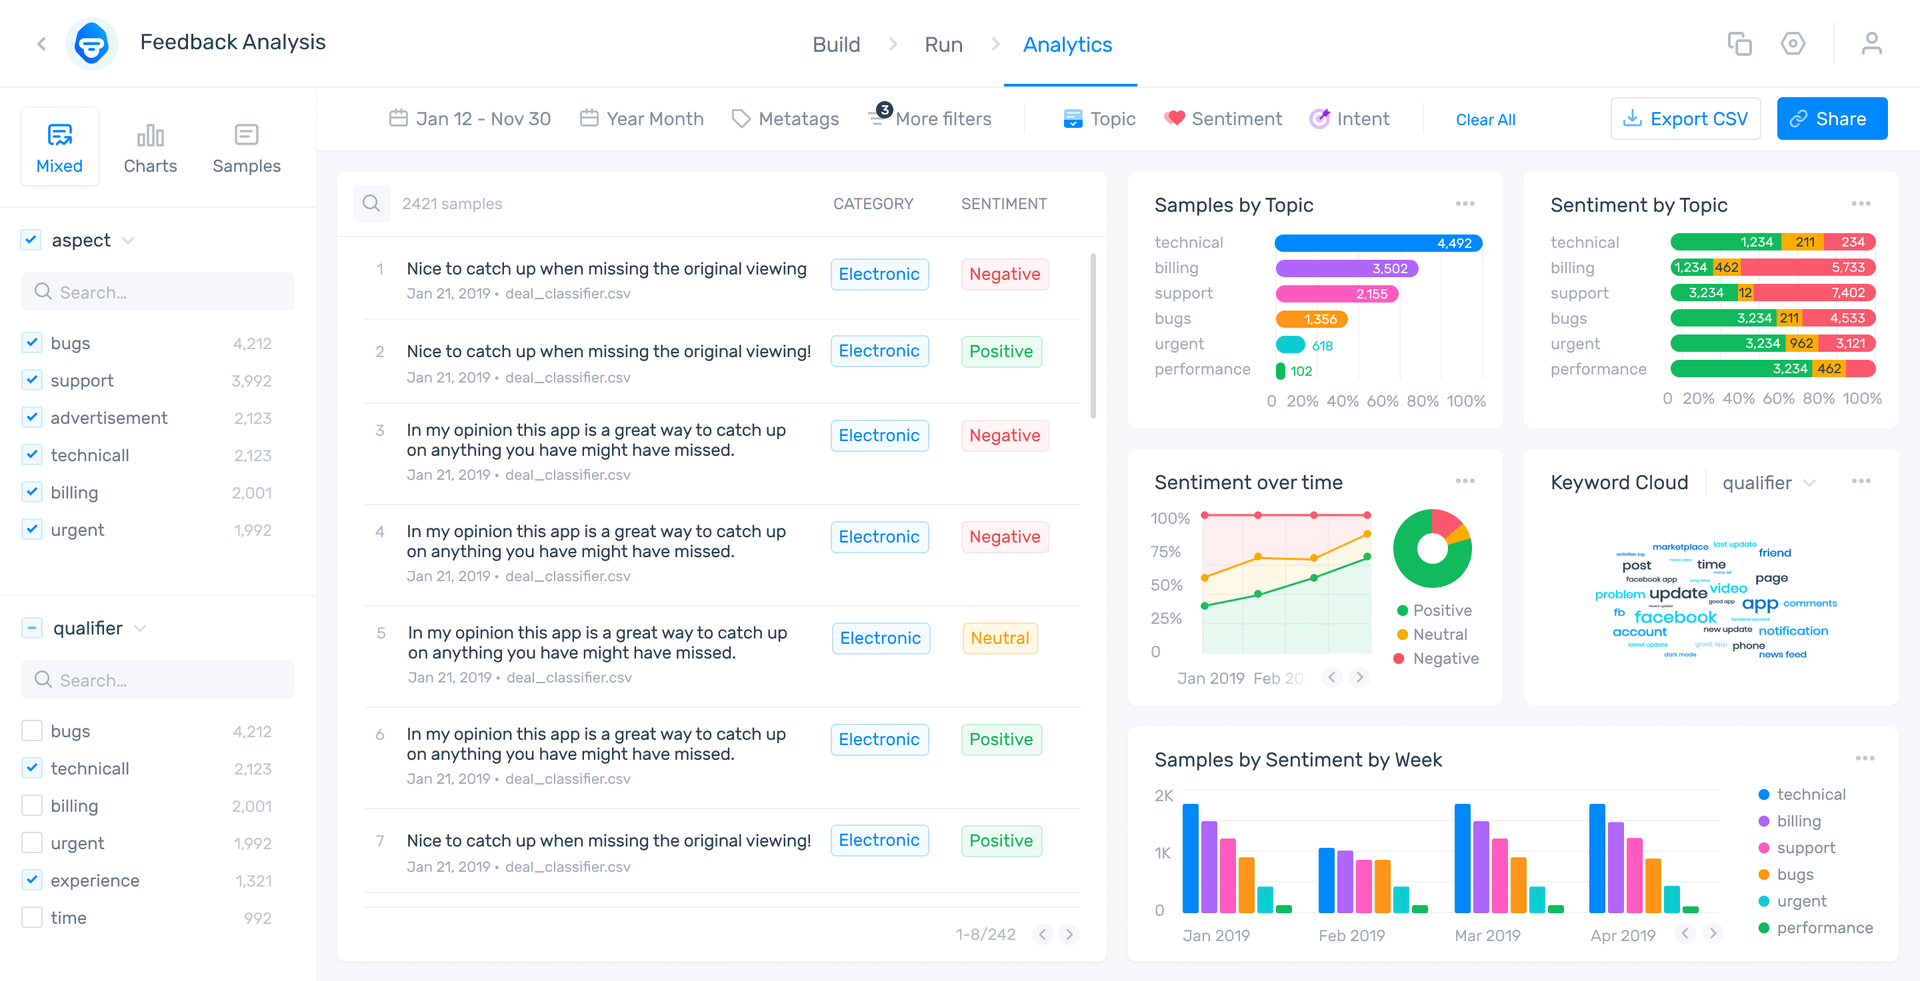 MonkeyLearn Studio dashboard showing results for intent classification and sentiment analysis in charts and graphs.